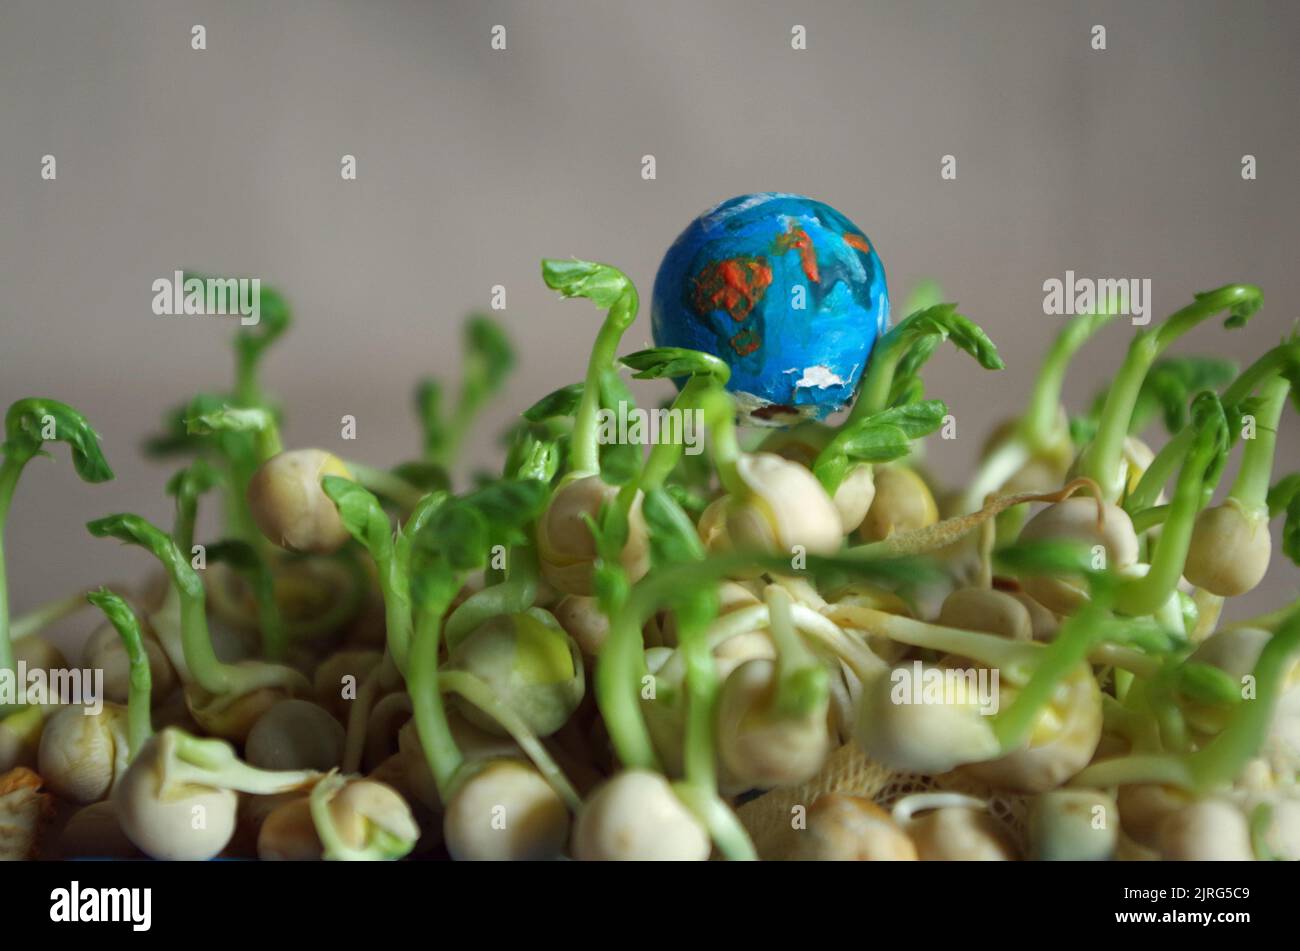 Pea Seeds and the Earth. Stock Photo